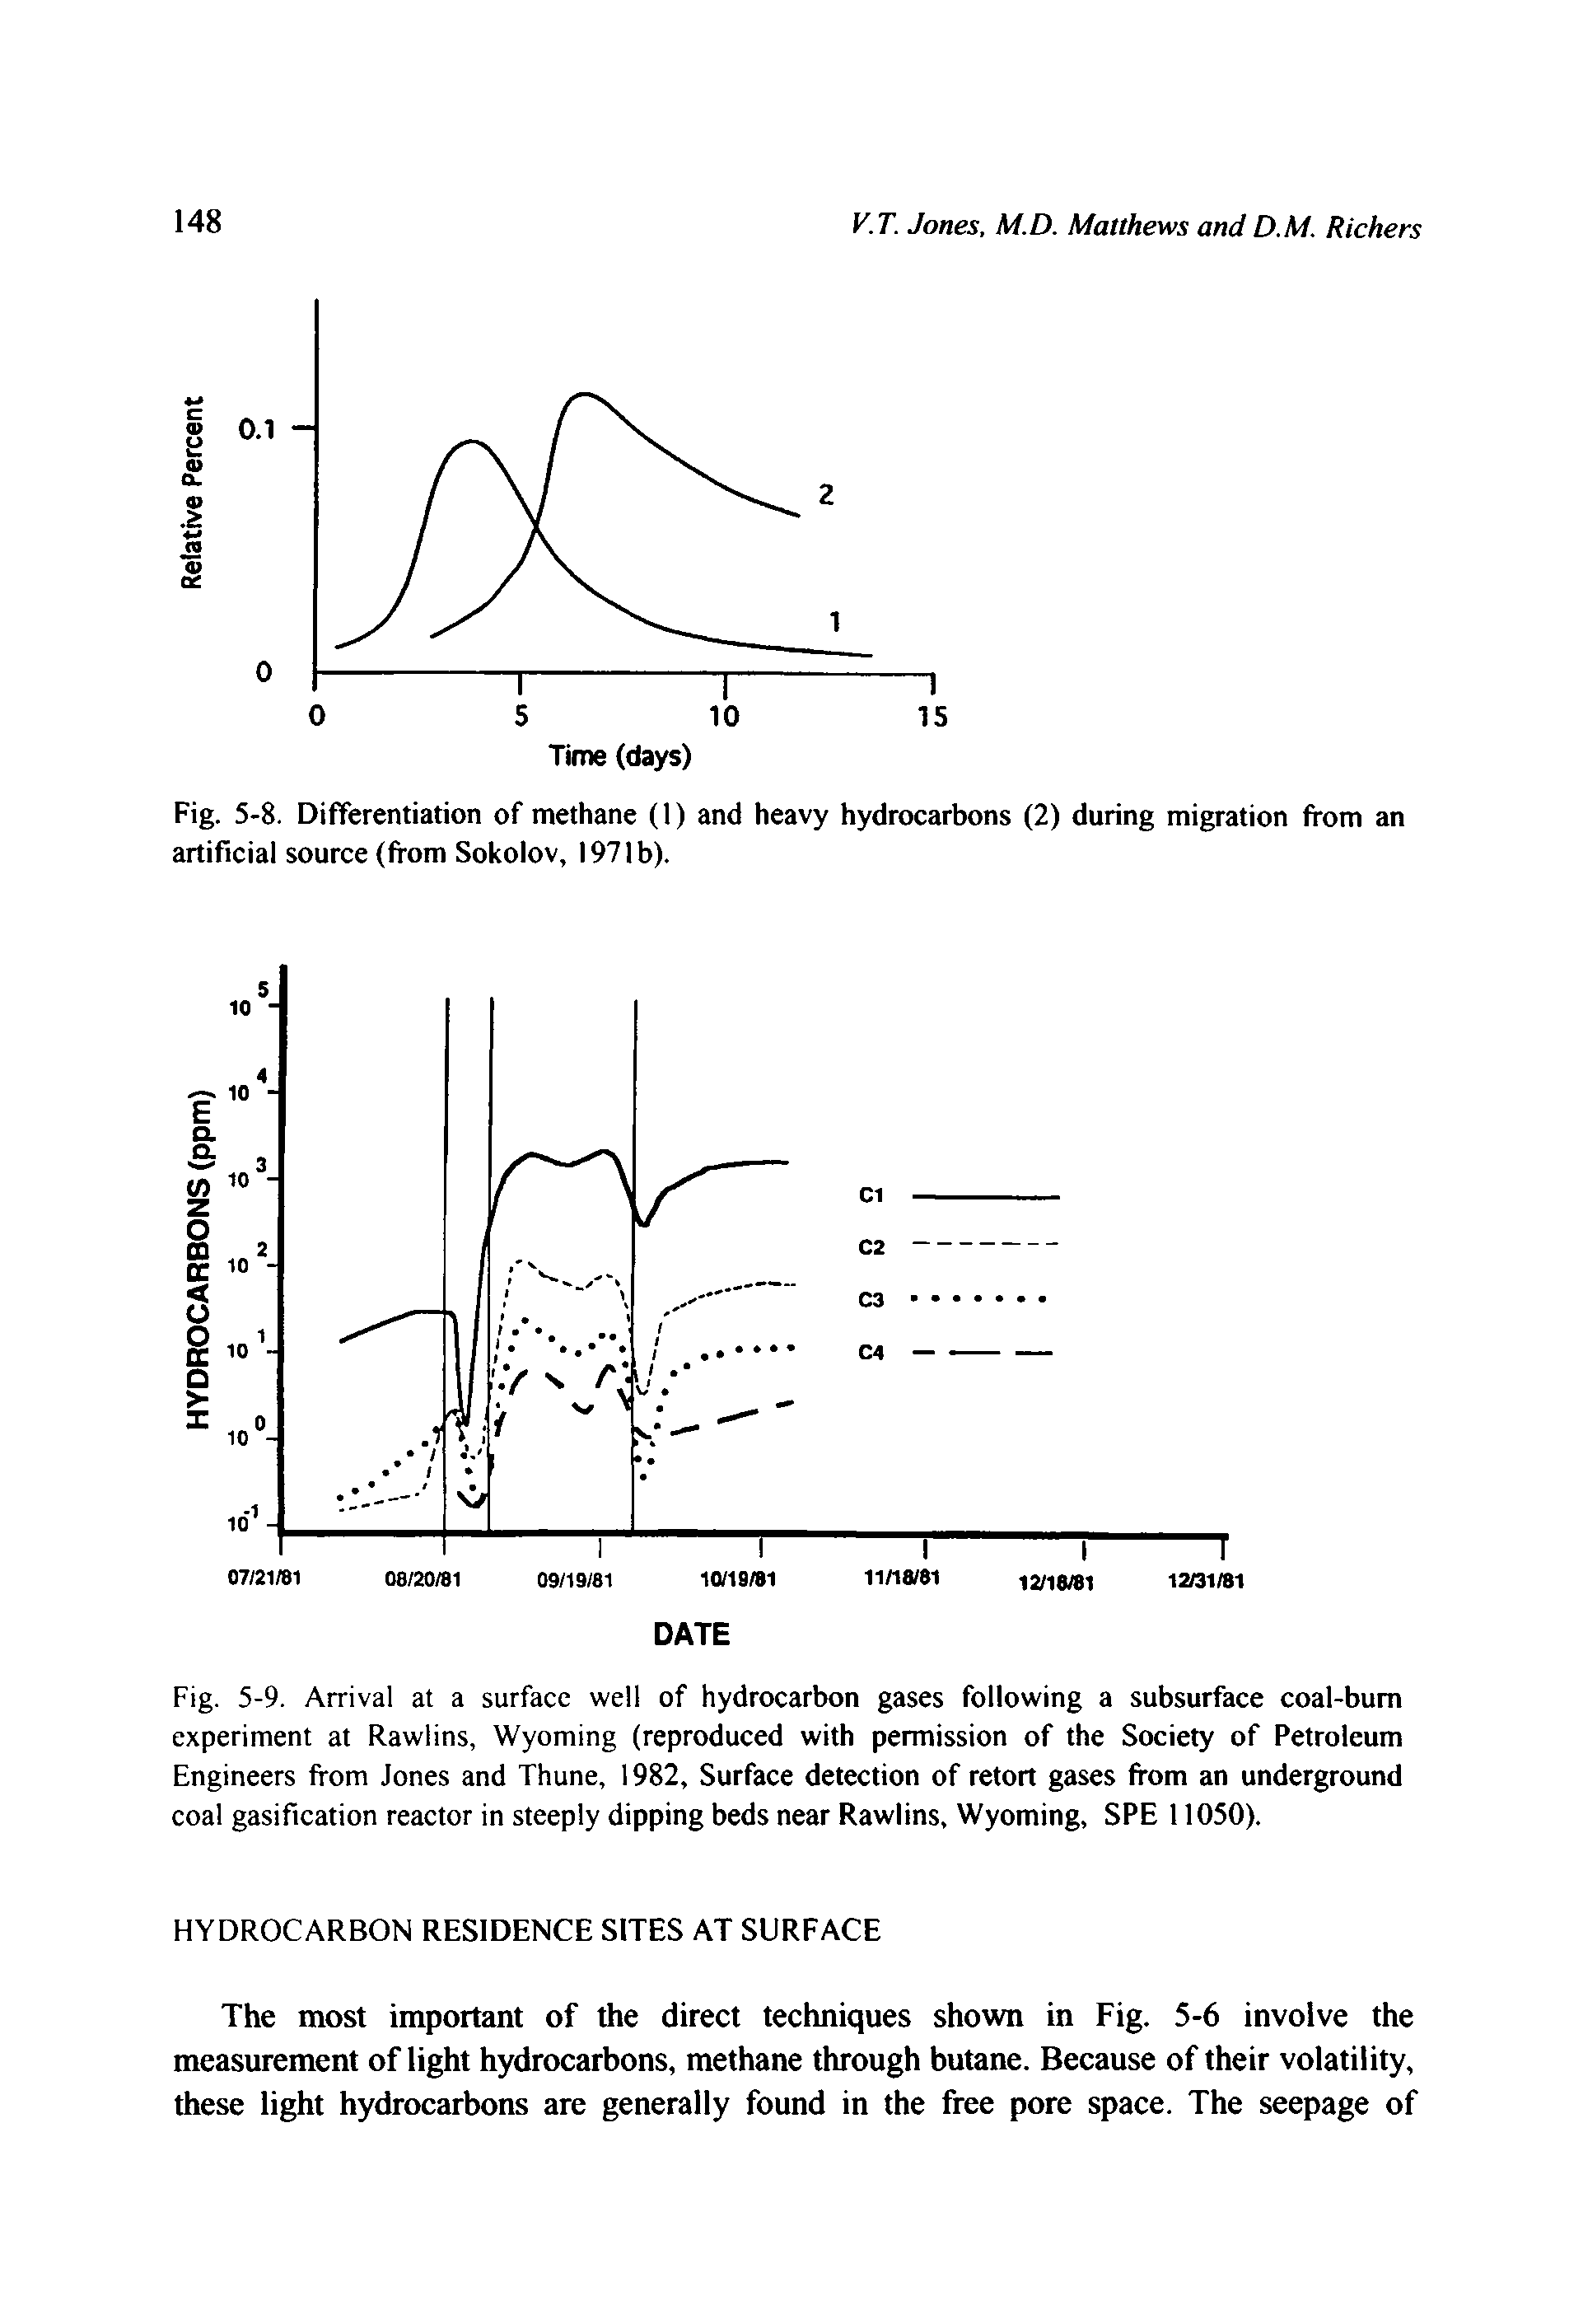 Fig. 5-9. Arrival at a surface well of hydrocarbon gases following a subsurface coal-bum experiment at Rawlins, Wyoming (reproduced with permission of the Society of Petroleum Engineers from Jones and Thune, 1982, Surface detection of retort gases from an underground coal gasification reactor in steeply dipping beds near Rawlins, Wyoming, SPE 11050).